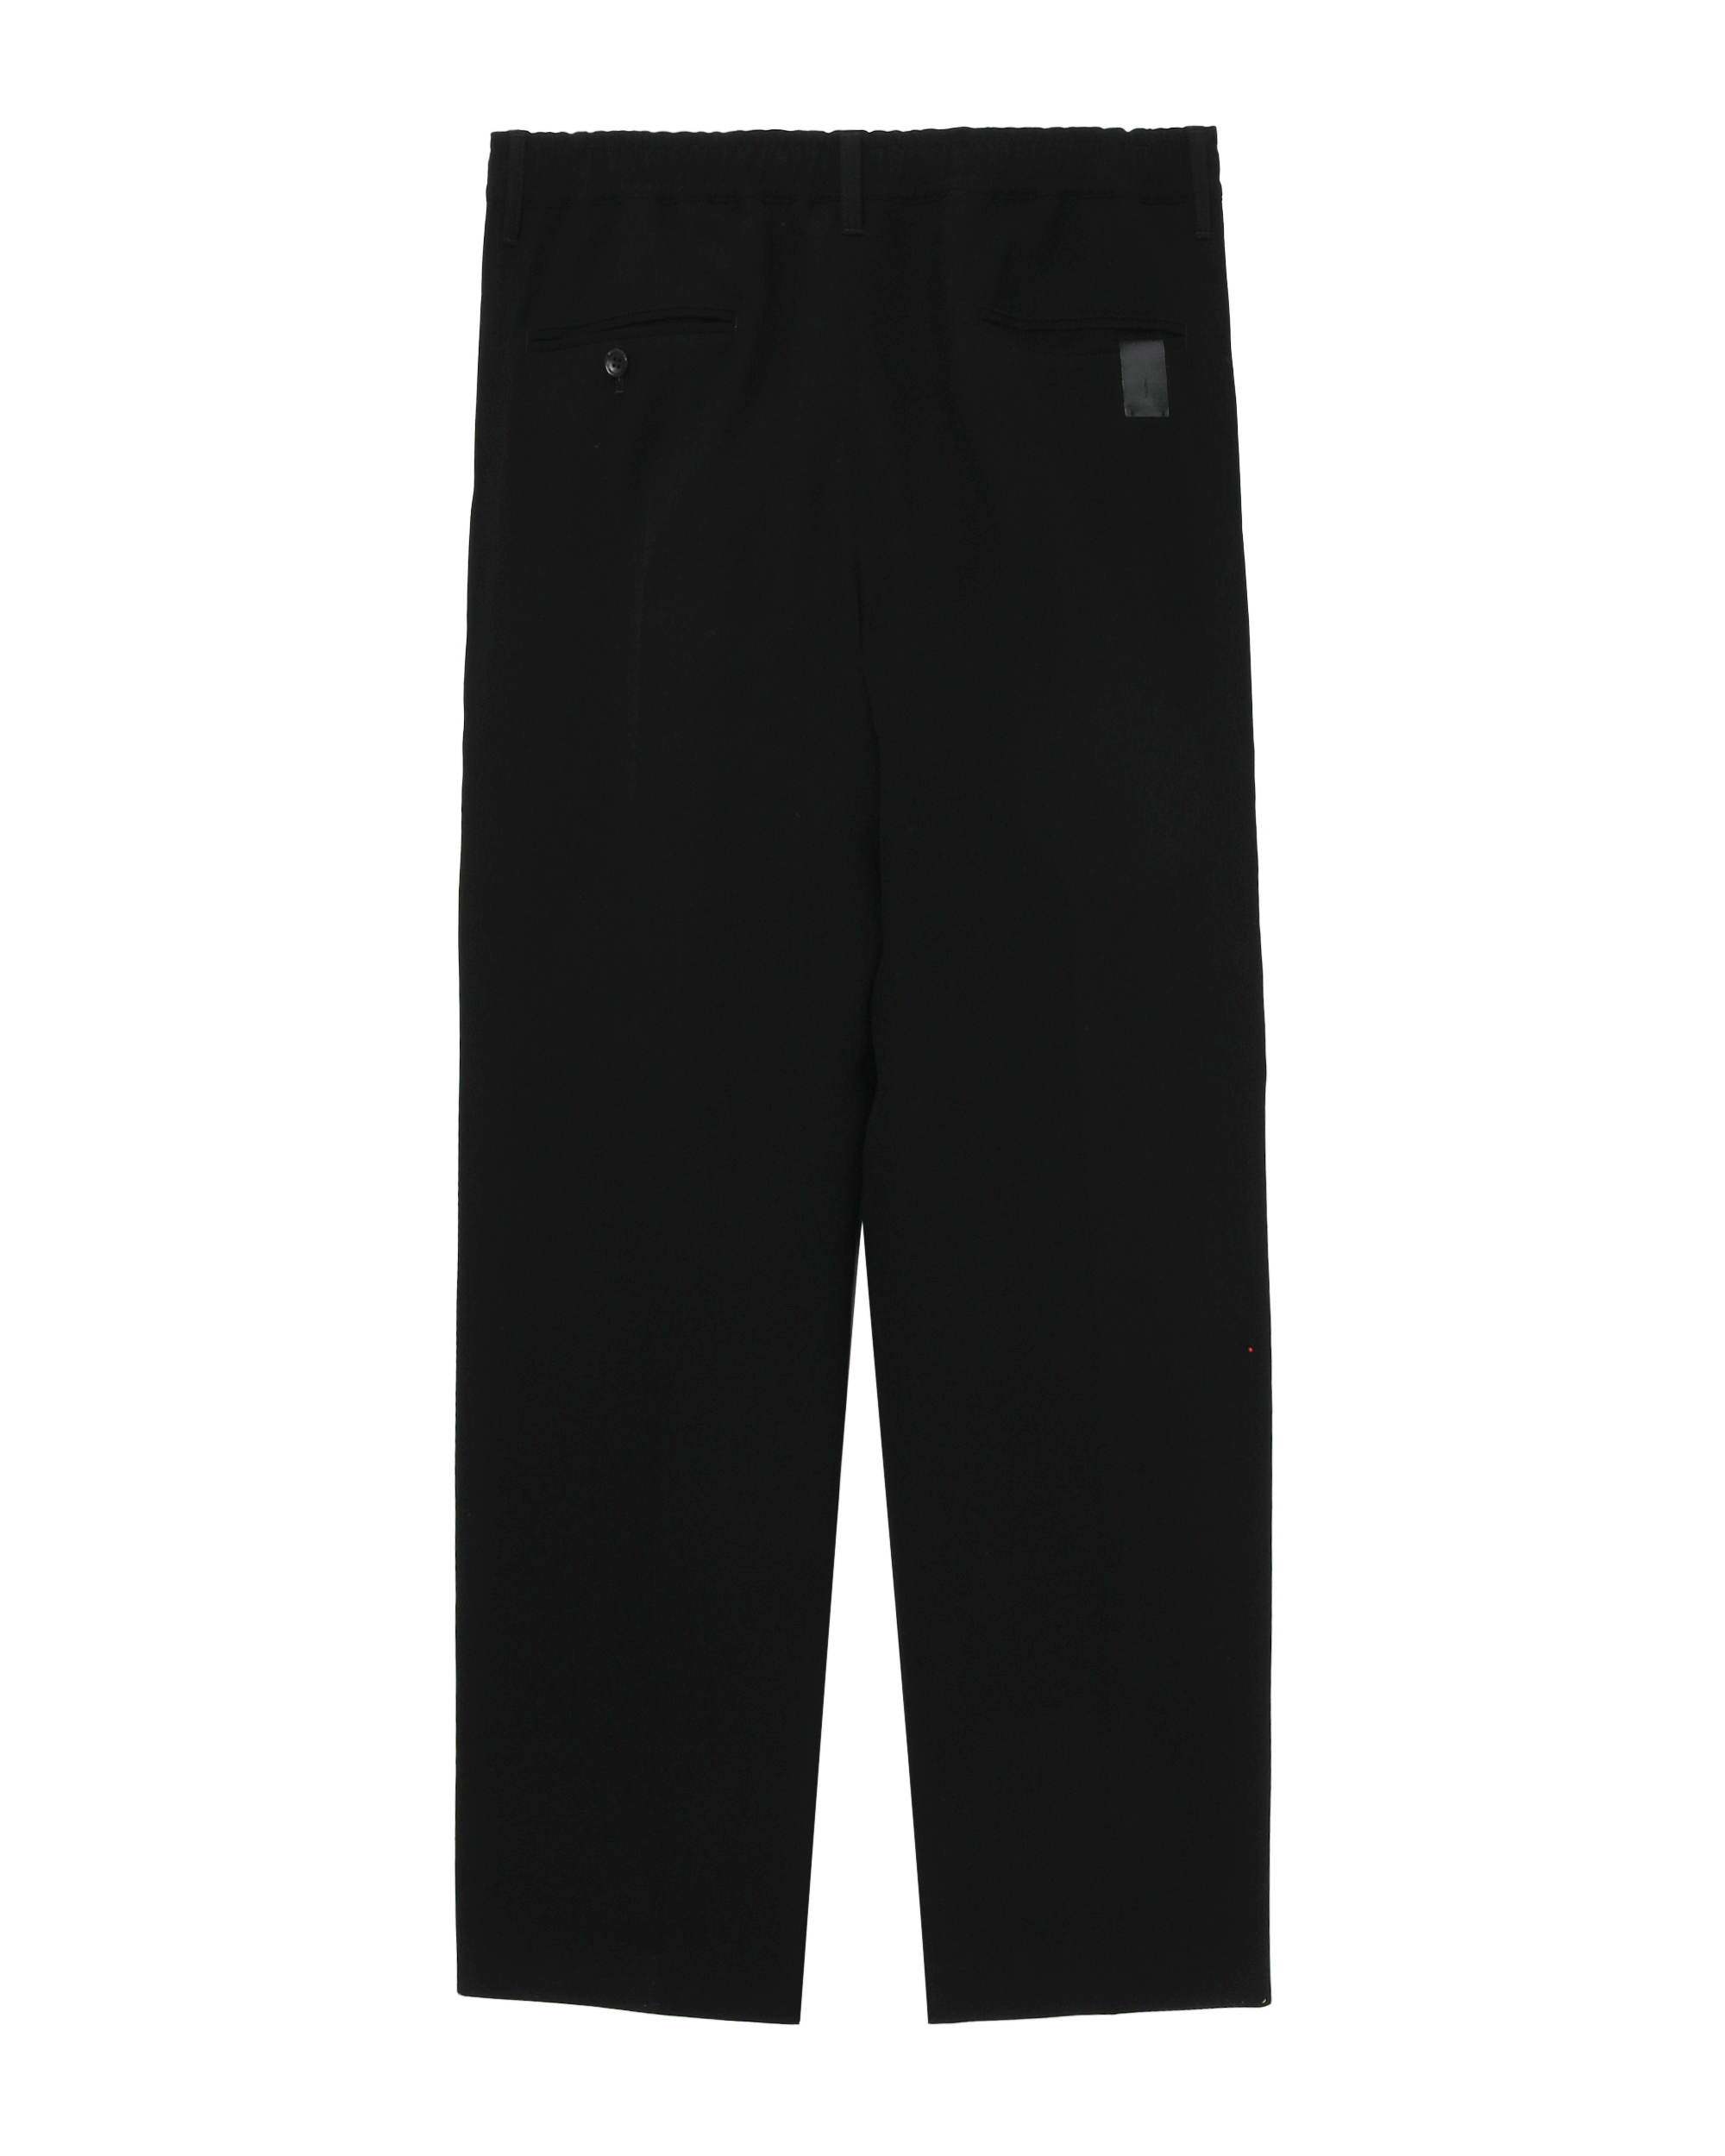 N.HOOLYWOOD Relaxed fit pants | ITeSHOP